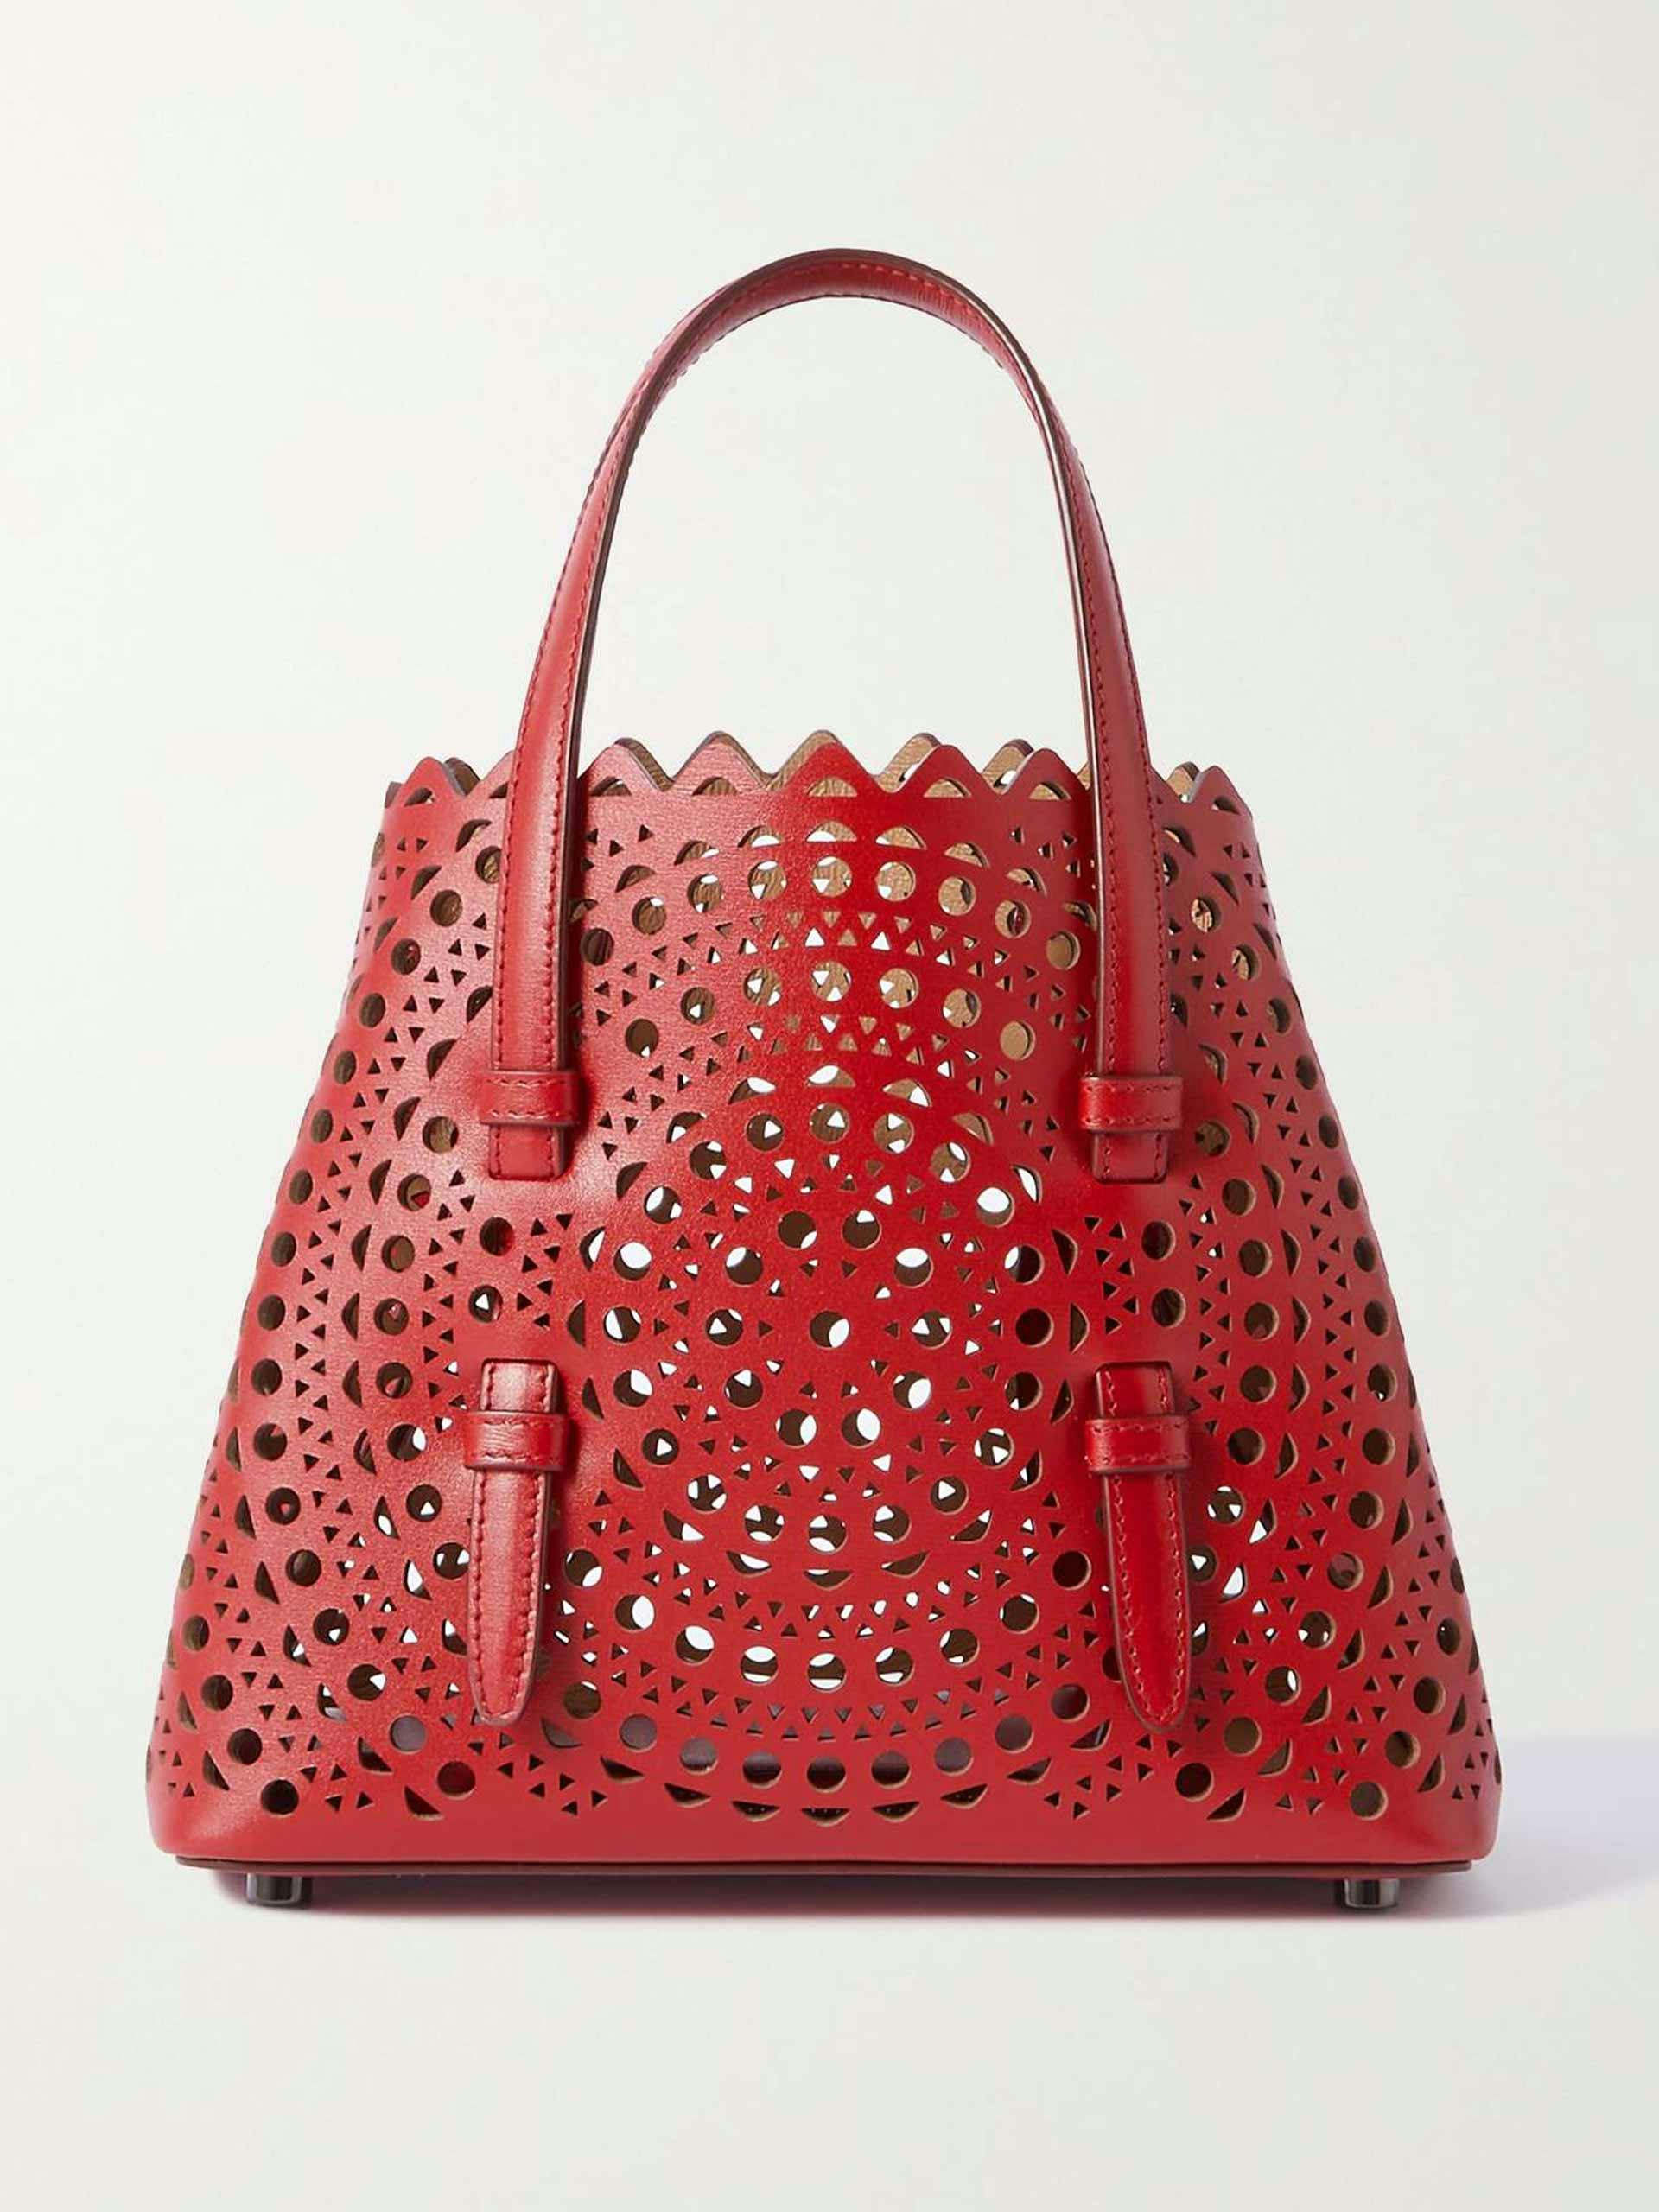 Red laser-cut leather tote